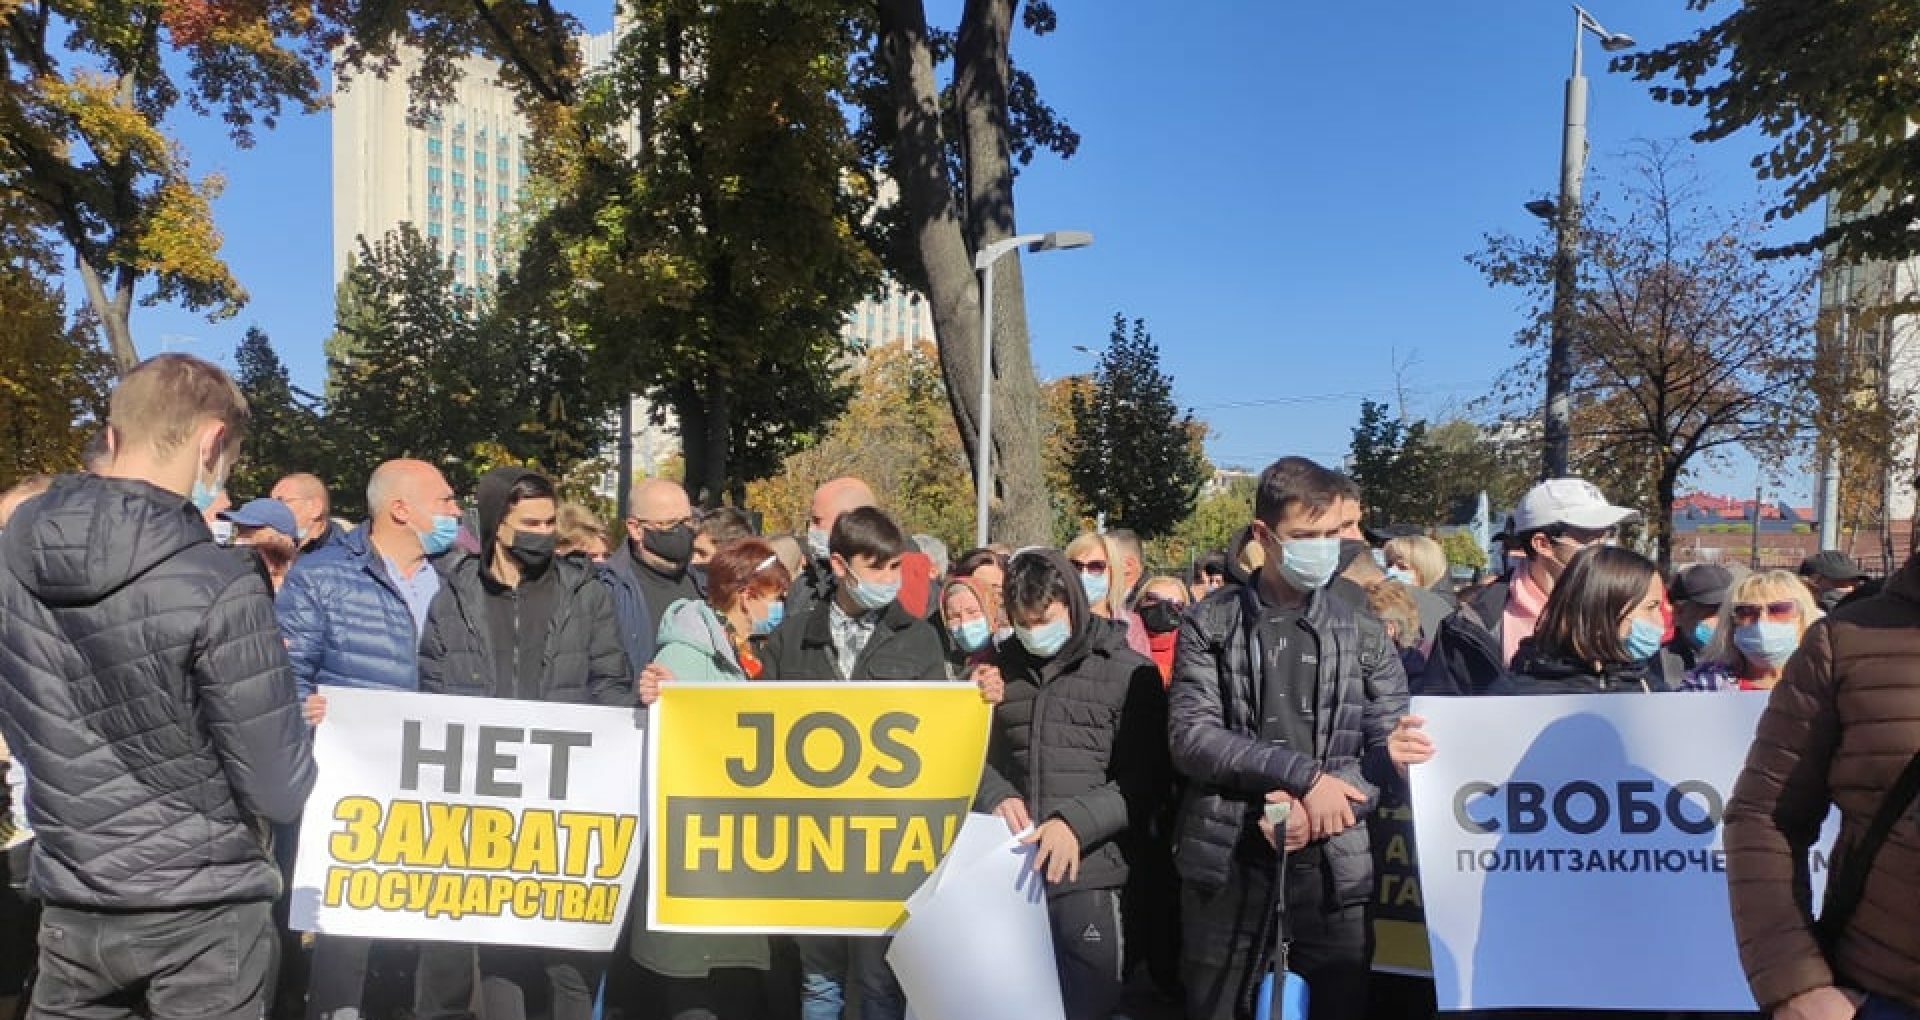 The Socialist and the Communist Parties Organized a Protest after the Suspended Prosecutor General was Detained